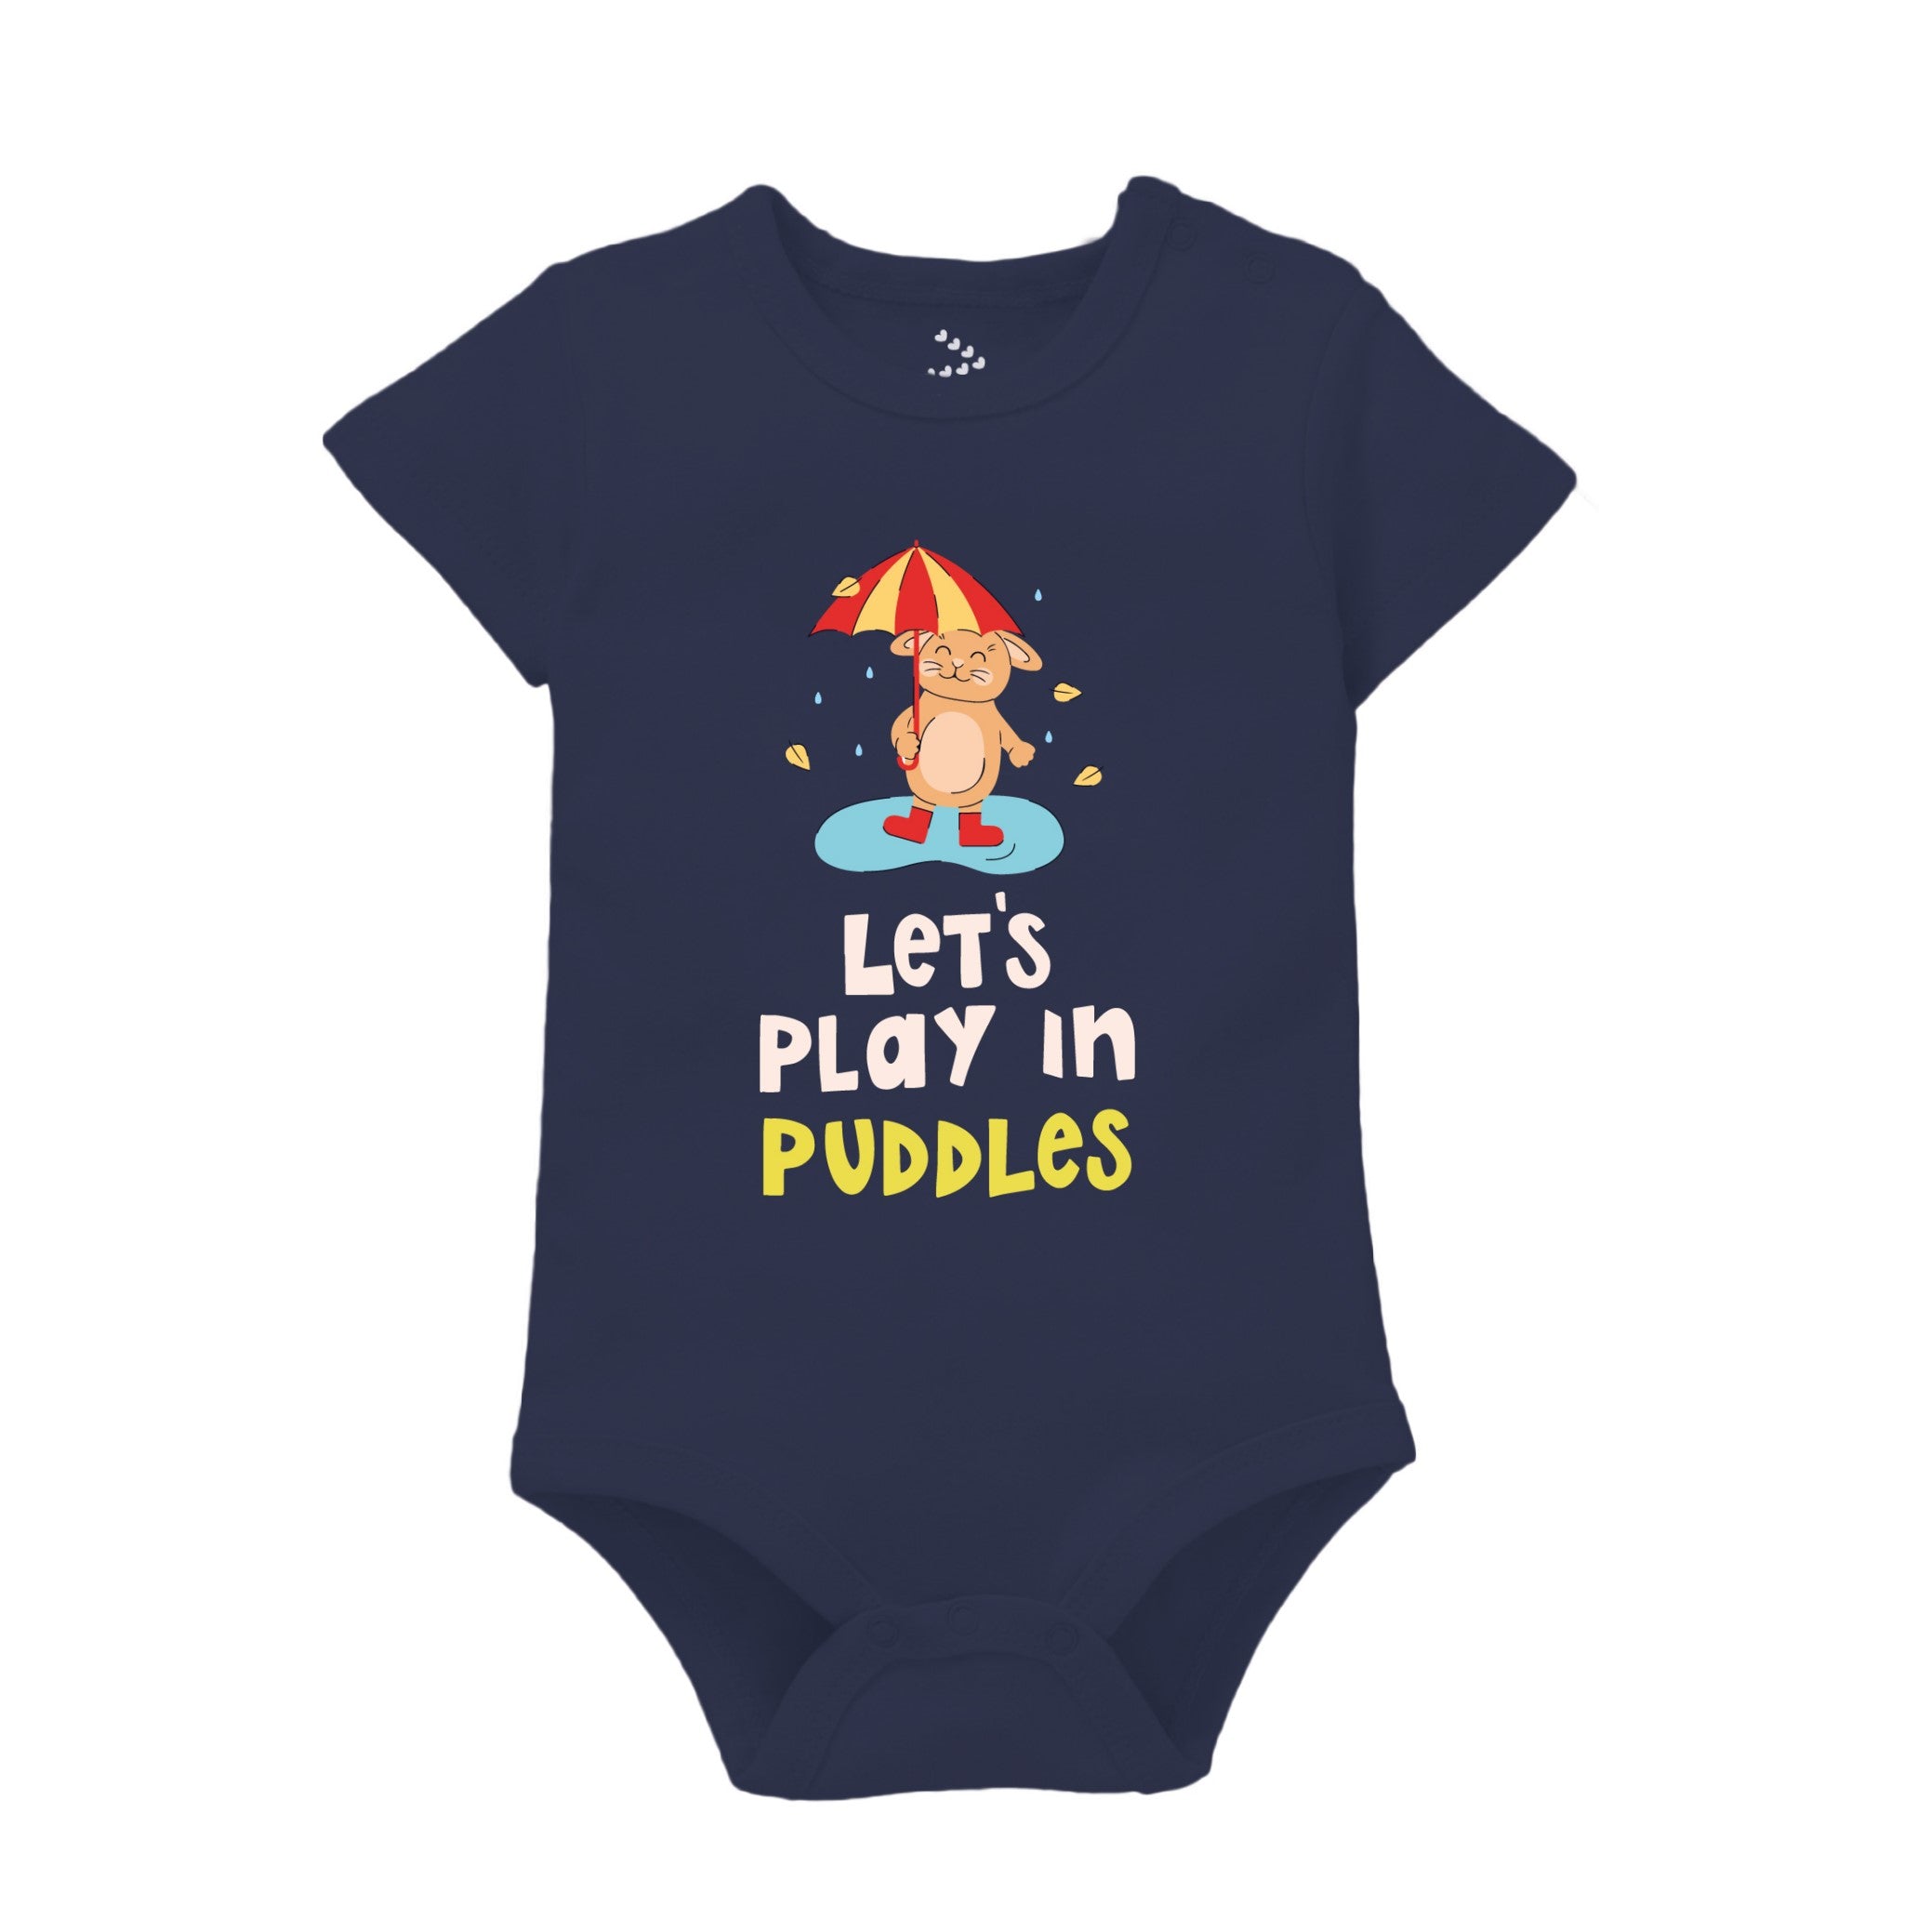 Let's Play In Puddles - Navy